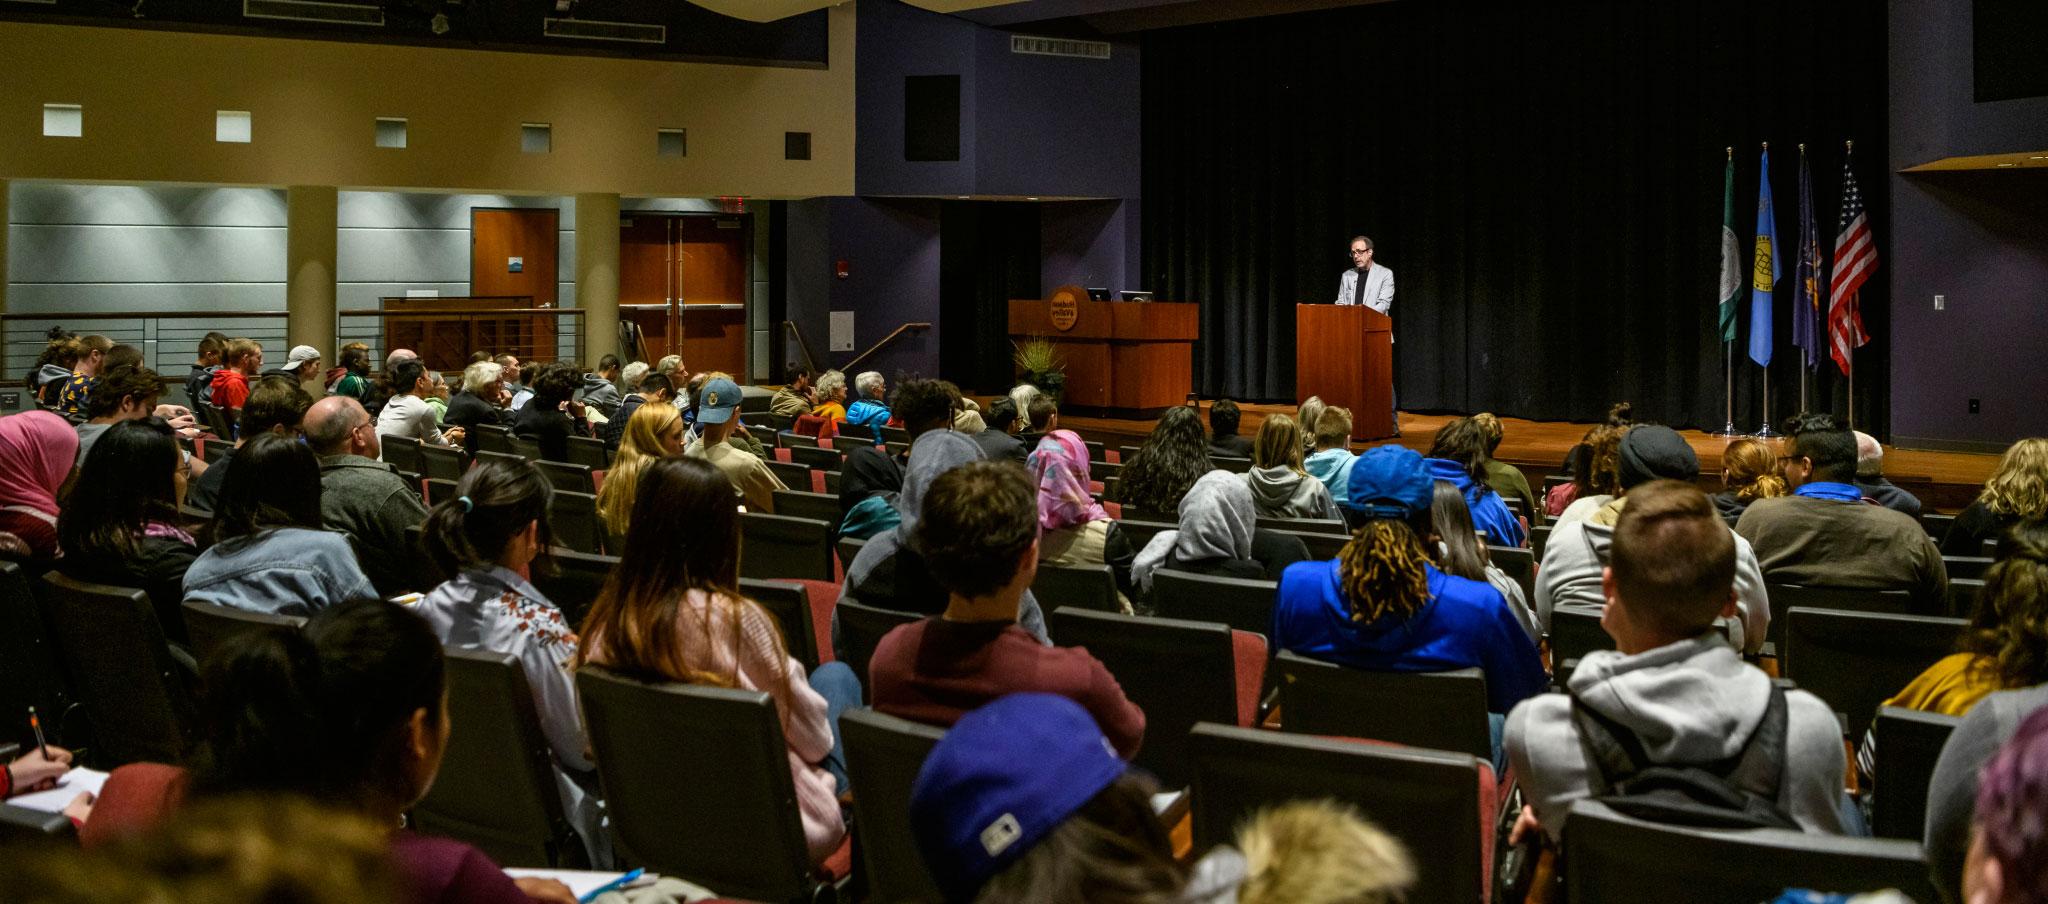 Students seated in the Bulmer Telecommunications Center Auditorium listening to a voices lecture